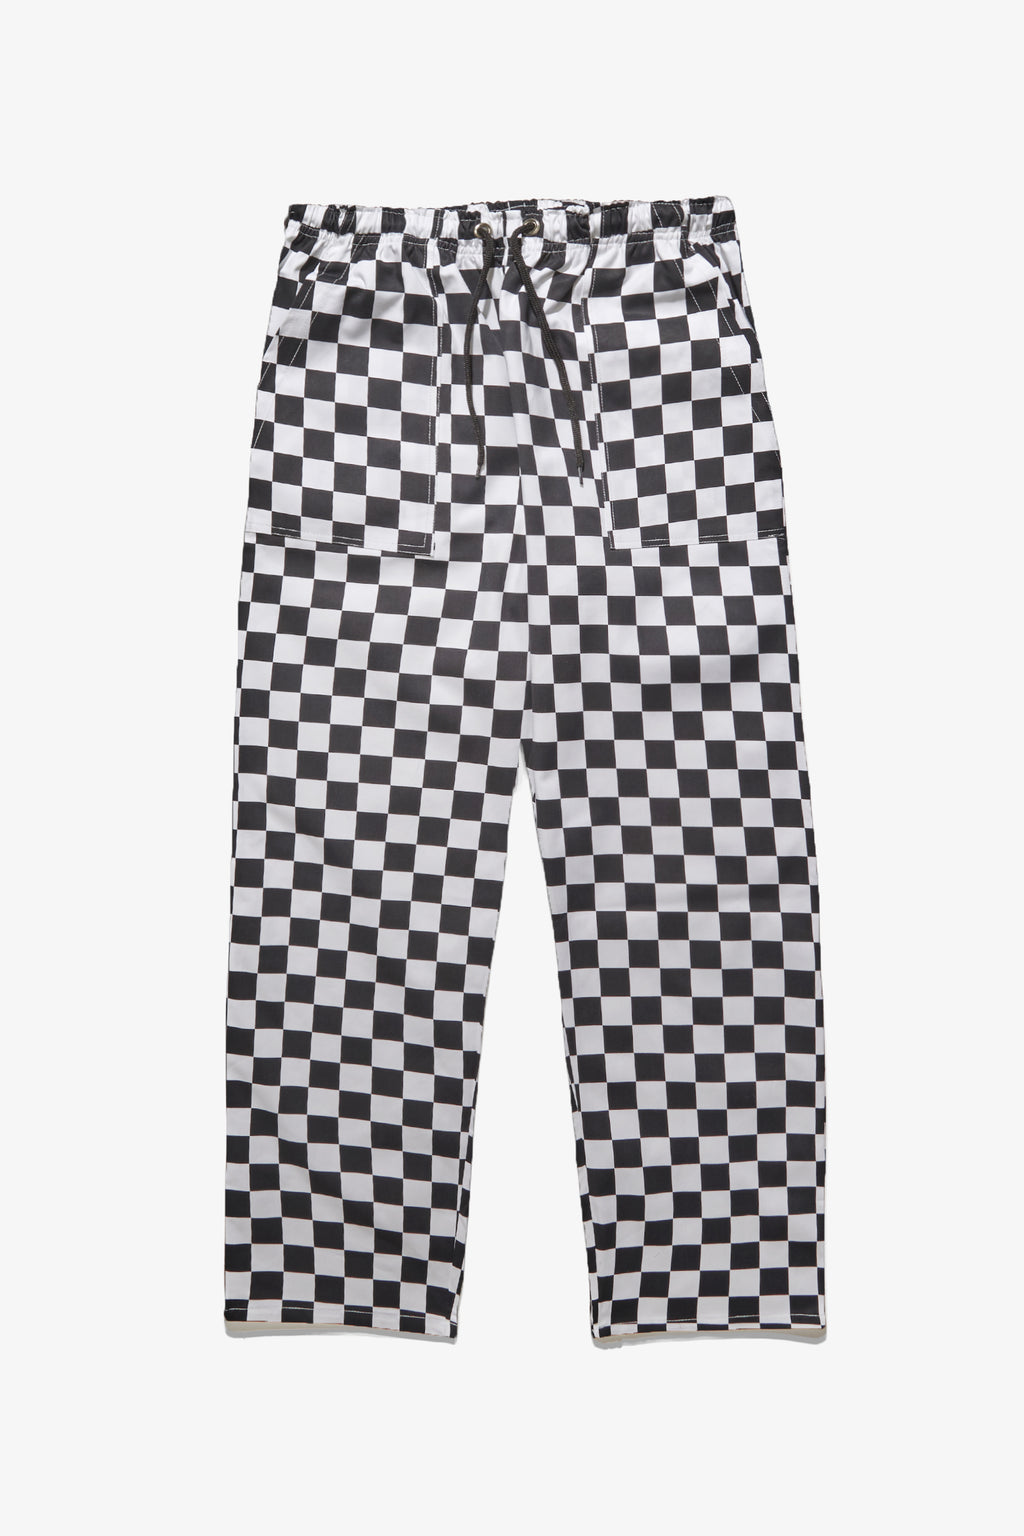 Service Works - Classic Chef Pants - Checkerboard